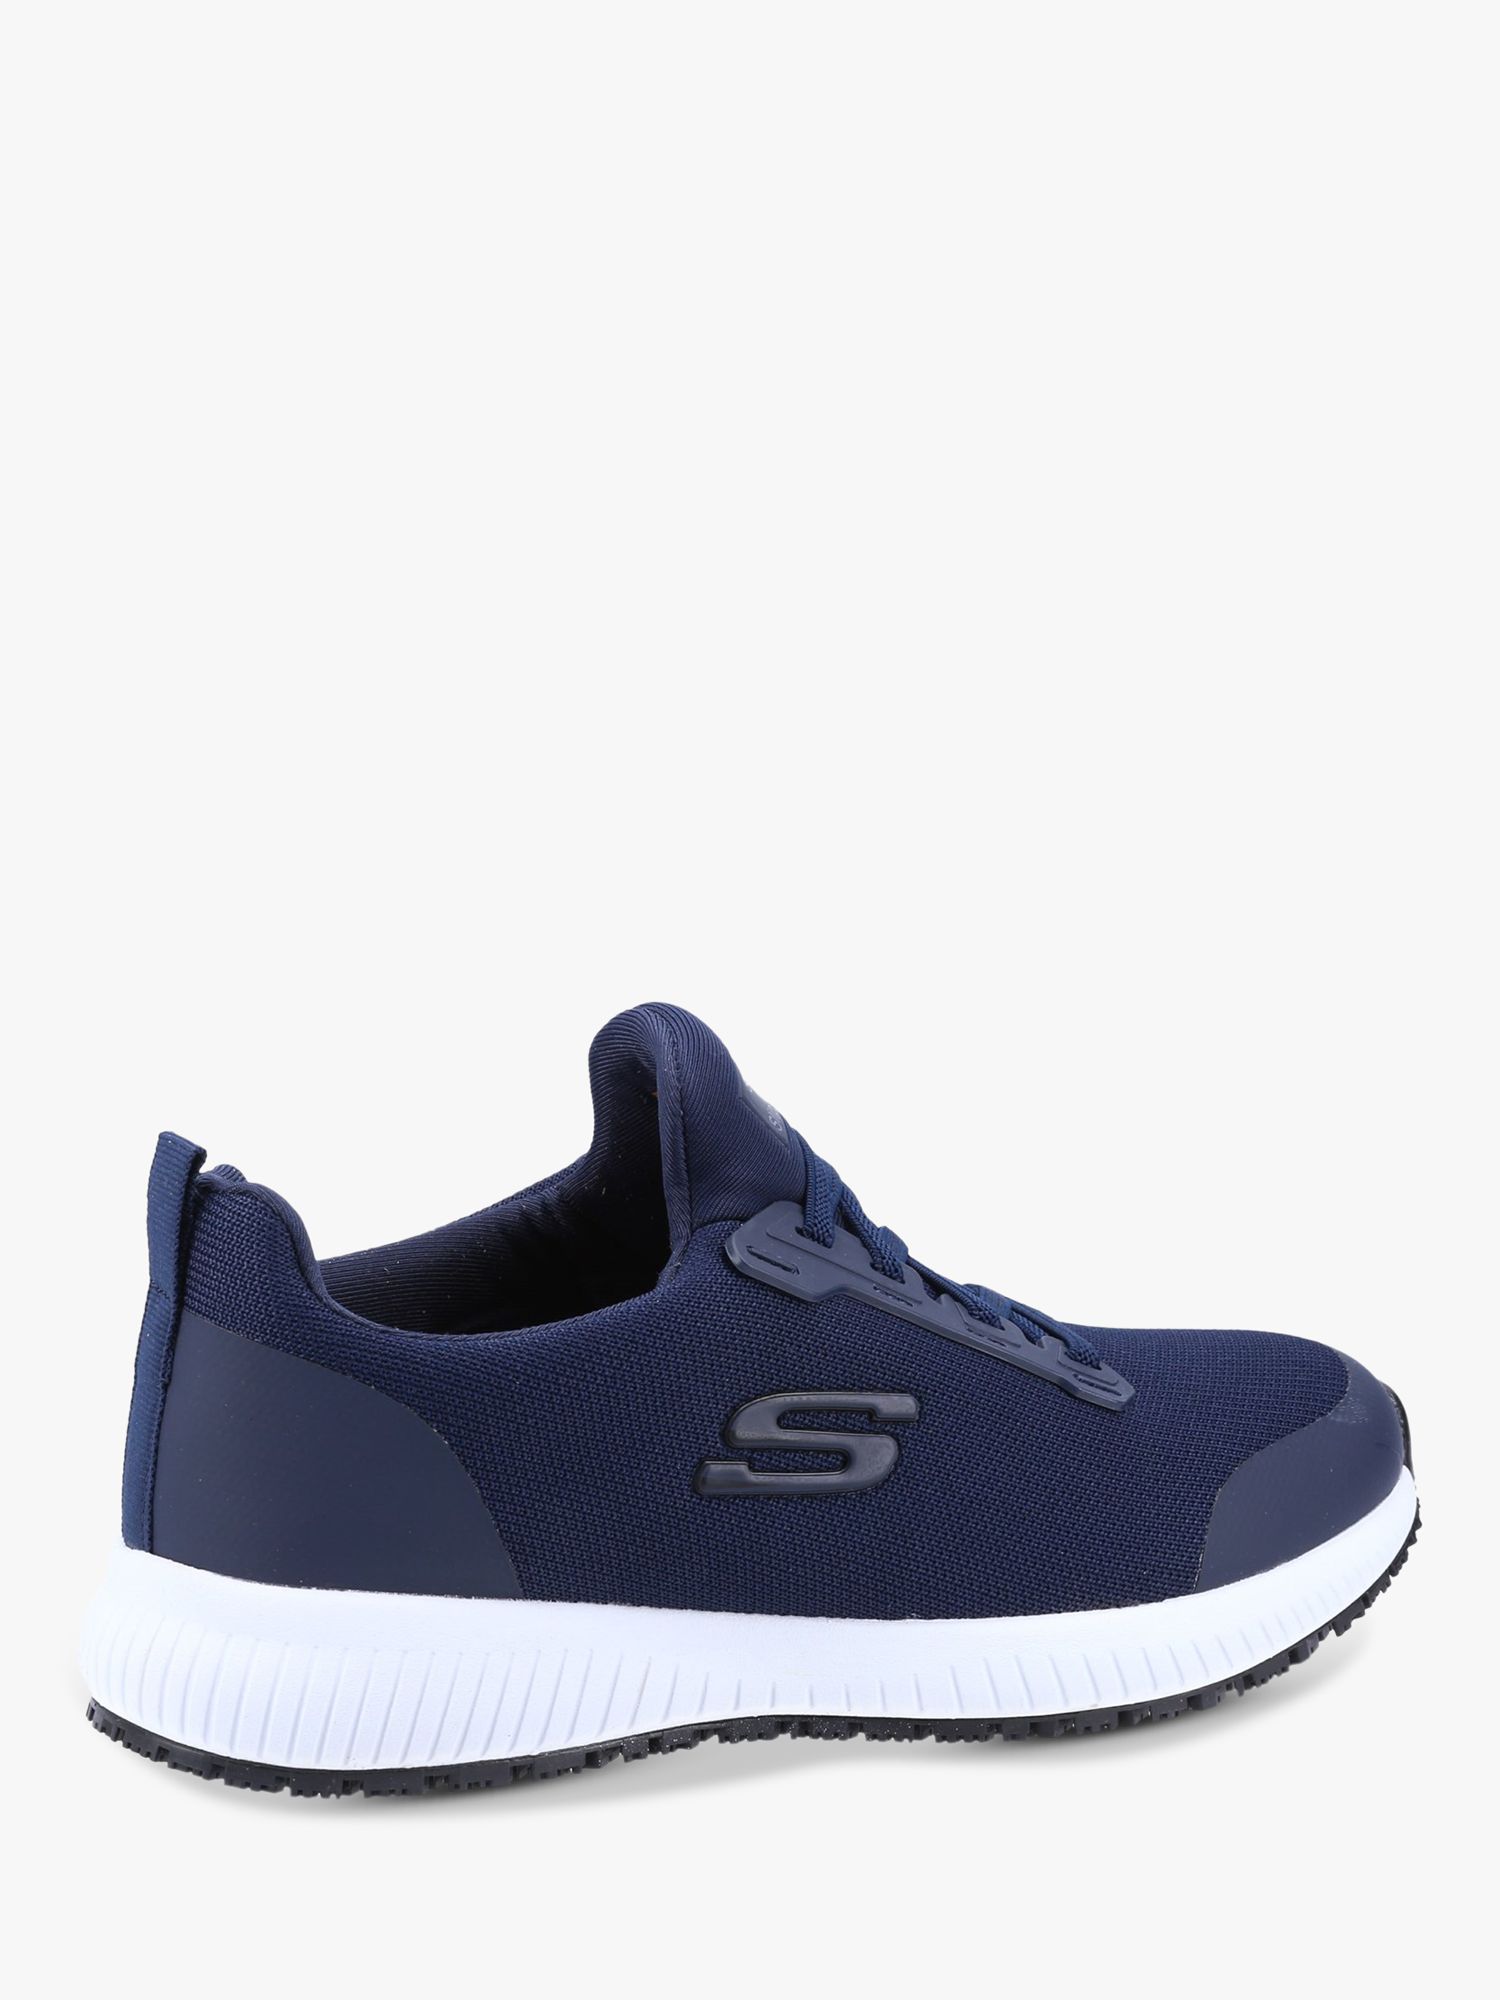 Skechers Squad SR Lace Up Trainers, Navy at John Lewis & Partners